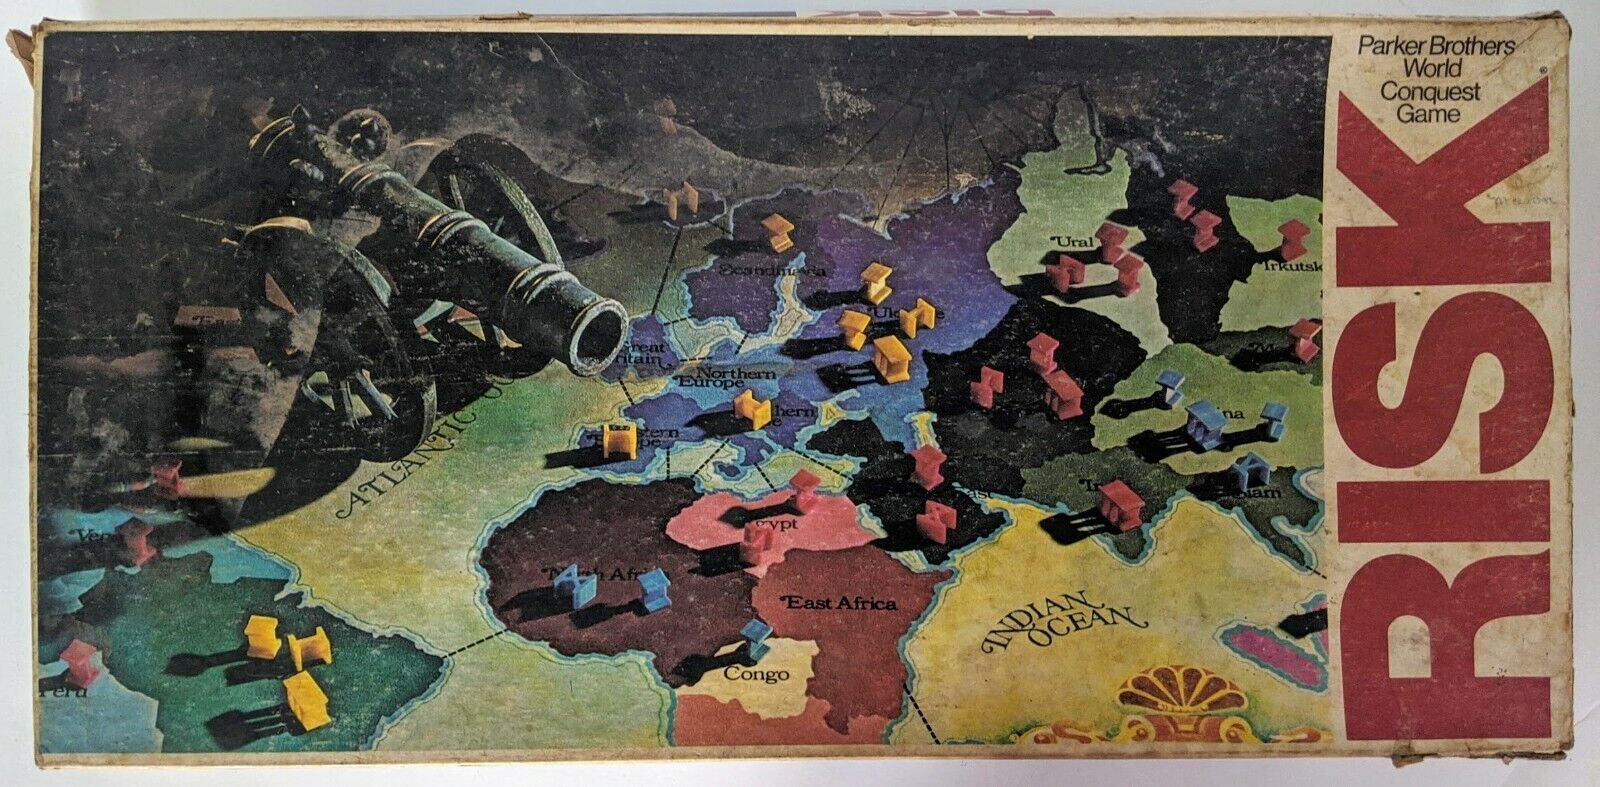 VTG Orig1980 Risk Board Game Parker Brothers World Conquest Replacement Parts - $12.85